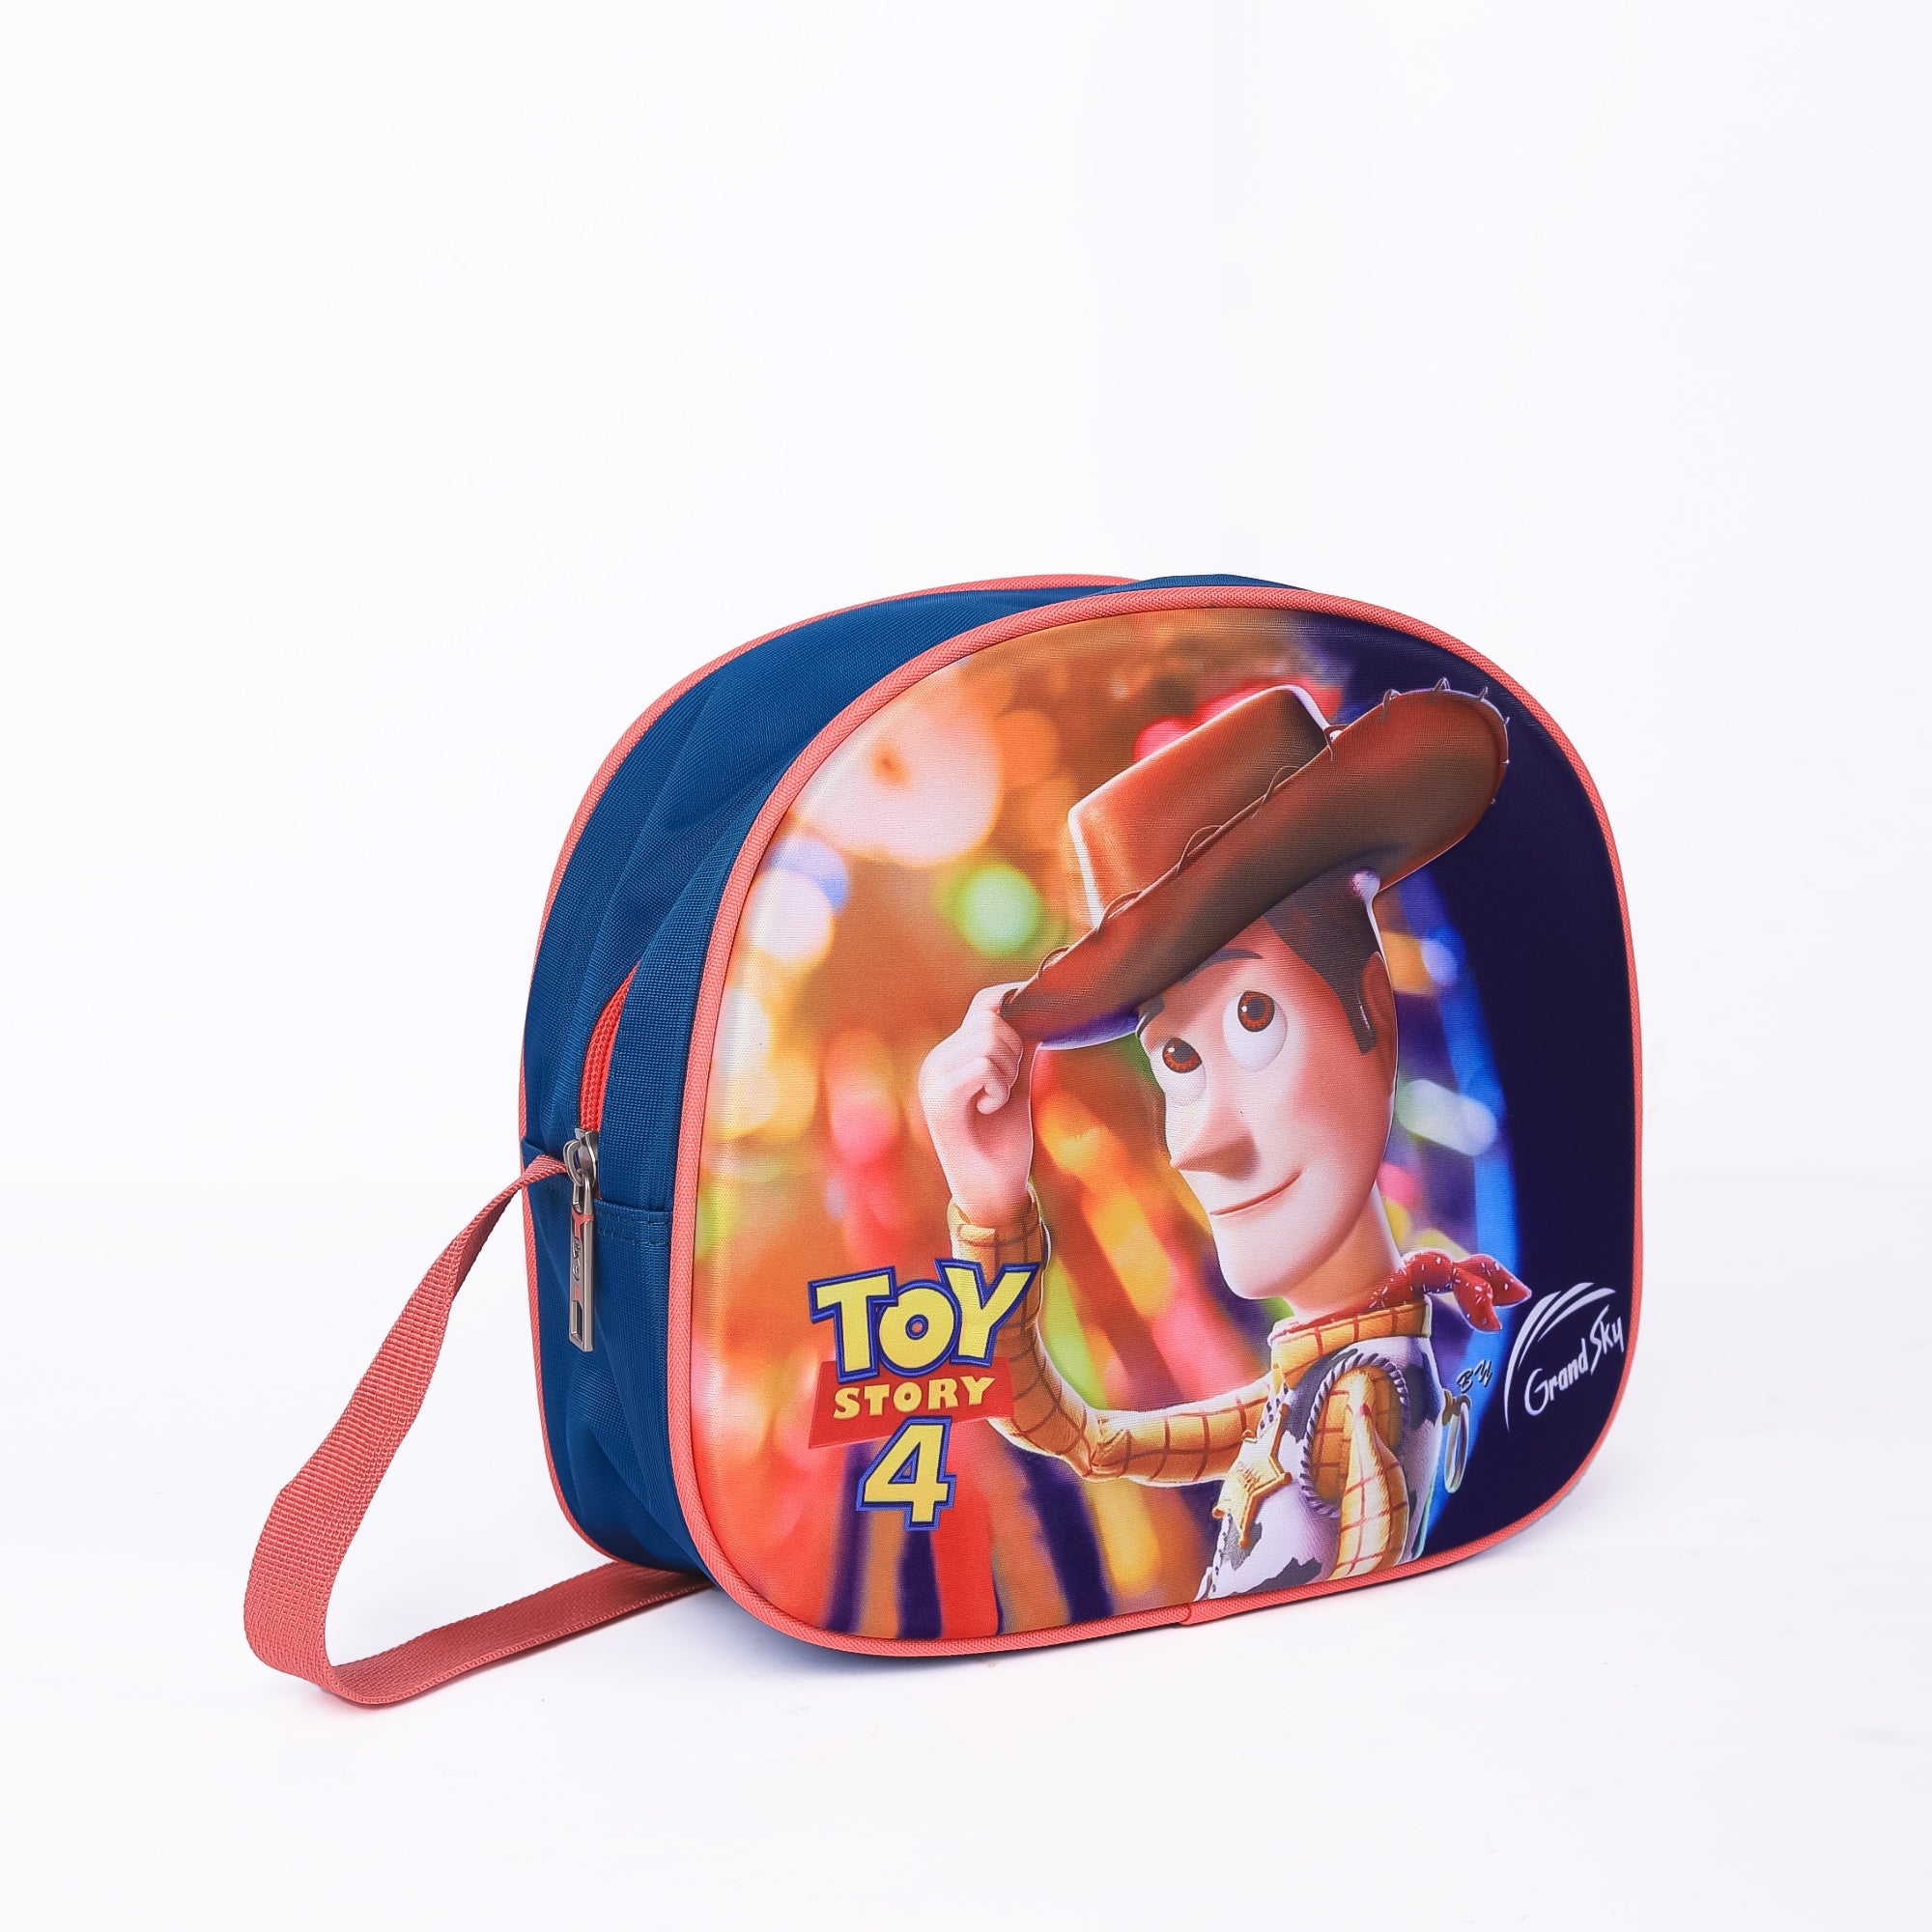 Toy Story Trolly Bag For Kids 15 INCH